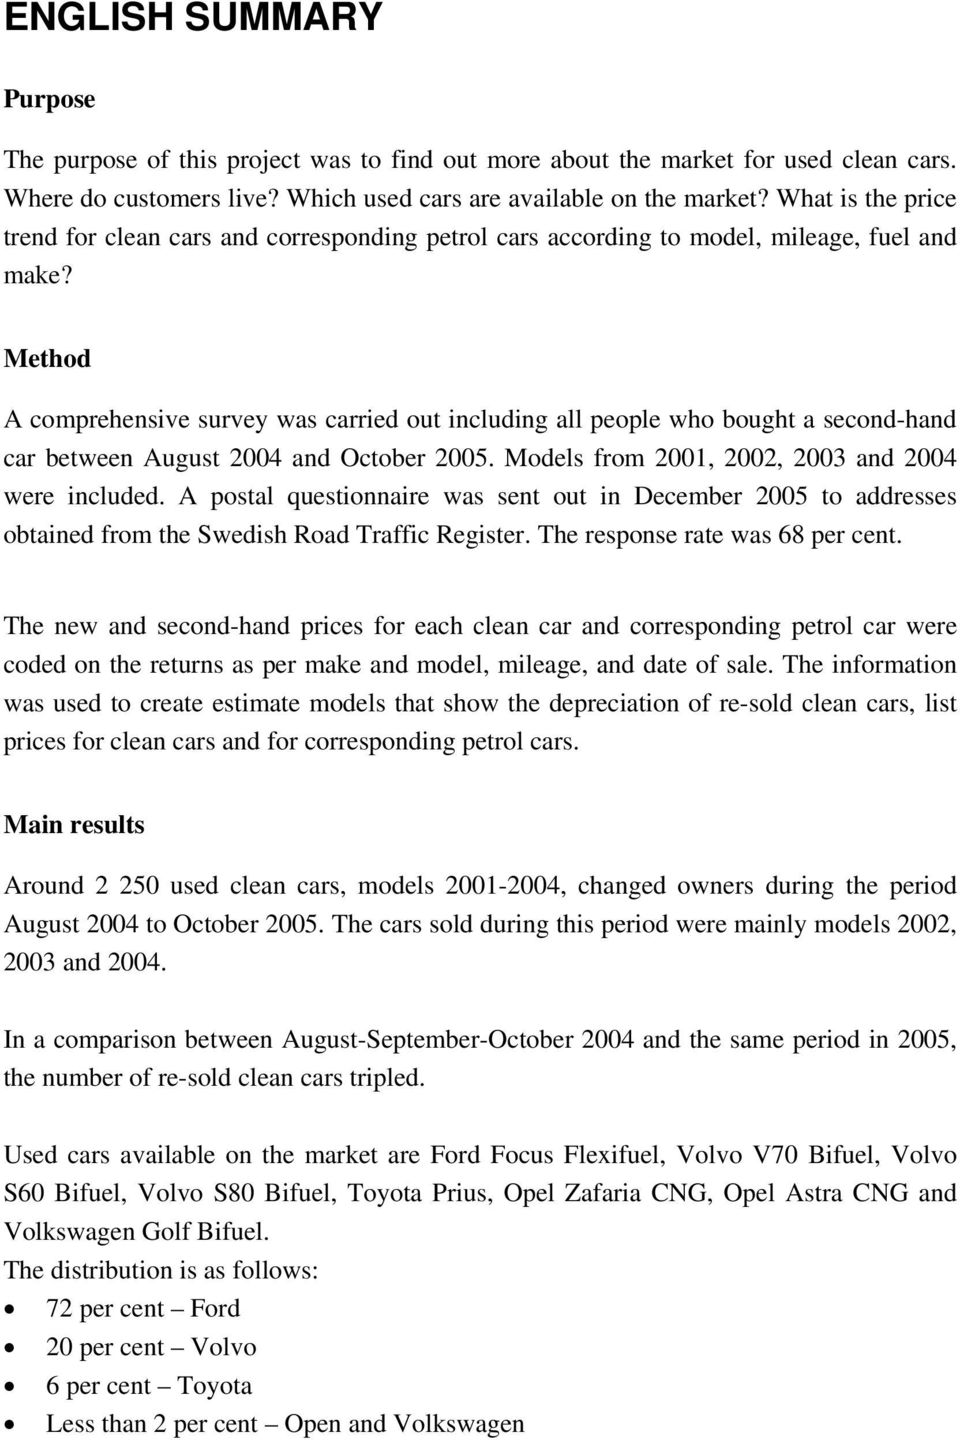 Method A comprehensive survey was carried out including all people who bought a second-hand car between August 2004 and October 2005. Models from 2001, 2002, 2003 and 2004 were included.